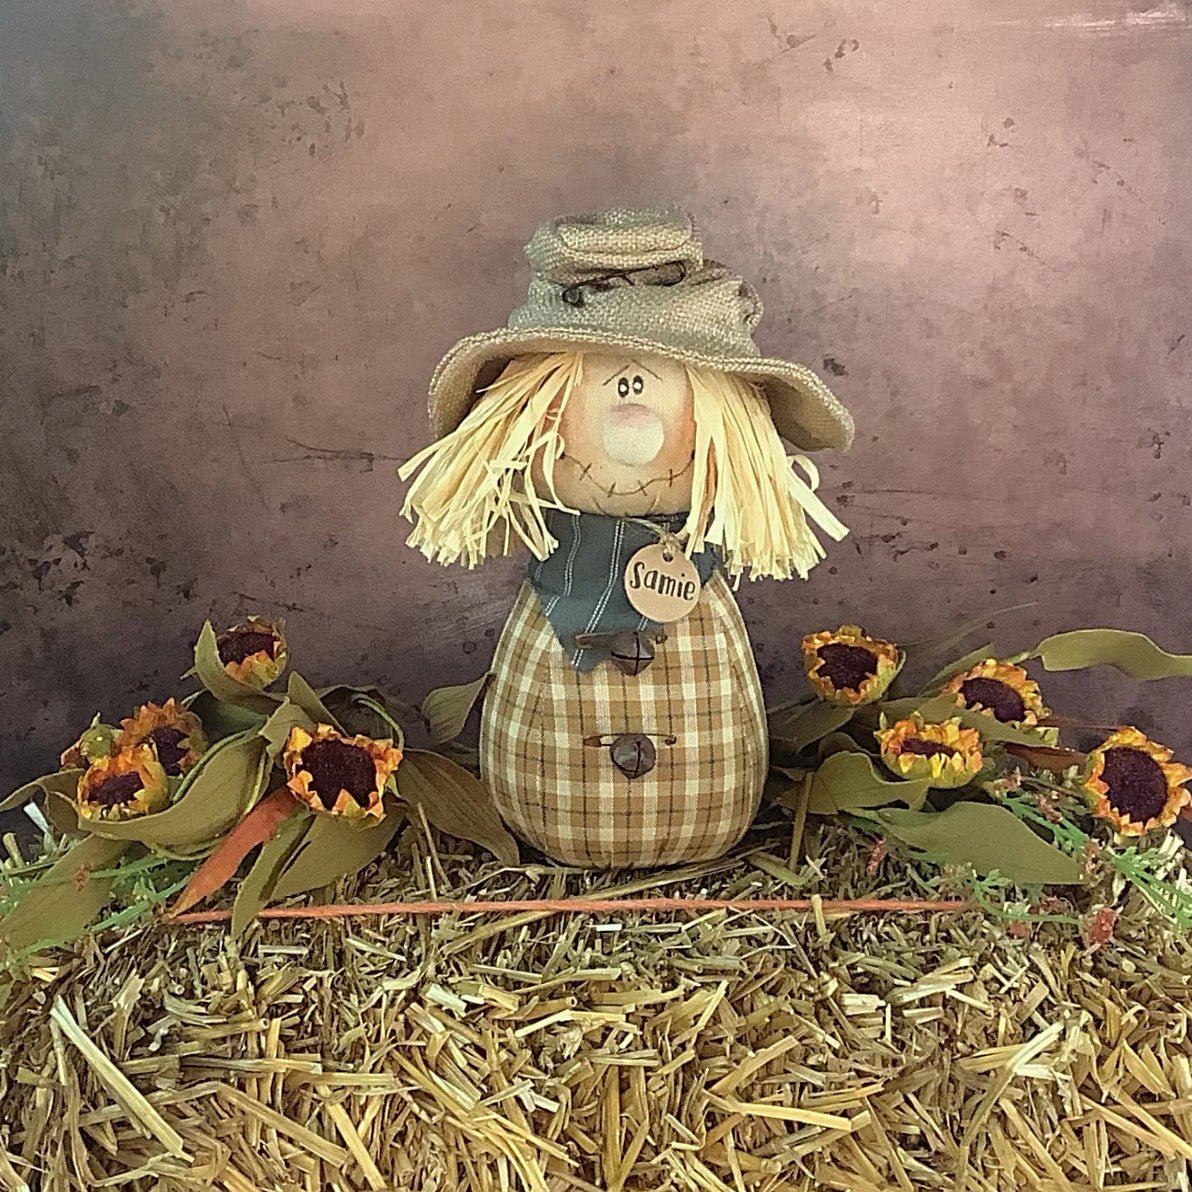 Honey and Me Halloween Samie the Goofy Scarecrow Doll - The Primitive Pineapple Collection